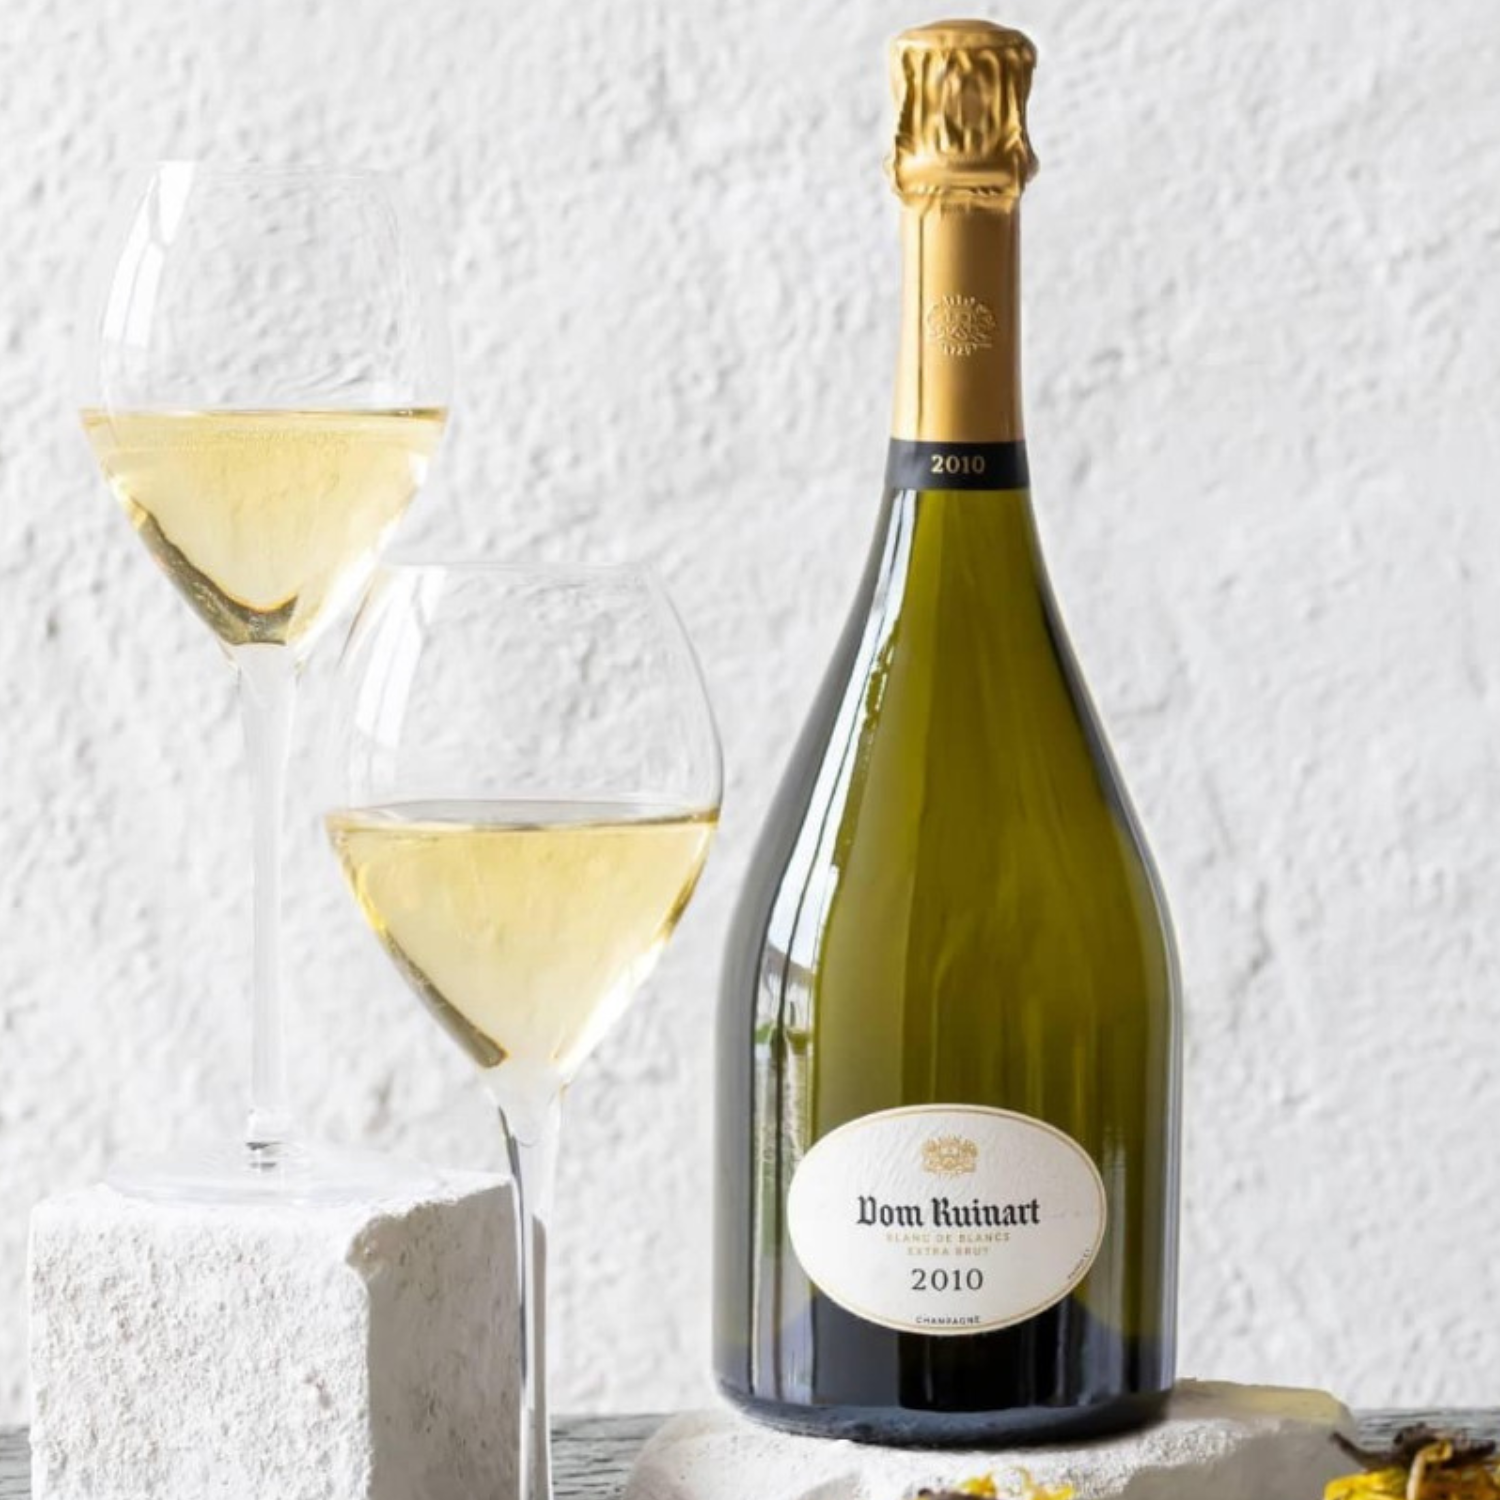 Indulge in Luxury:  The Exceptional Dom Ruinart 2010 Blanc de Blancs Extra Brut